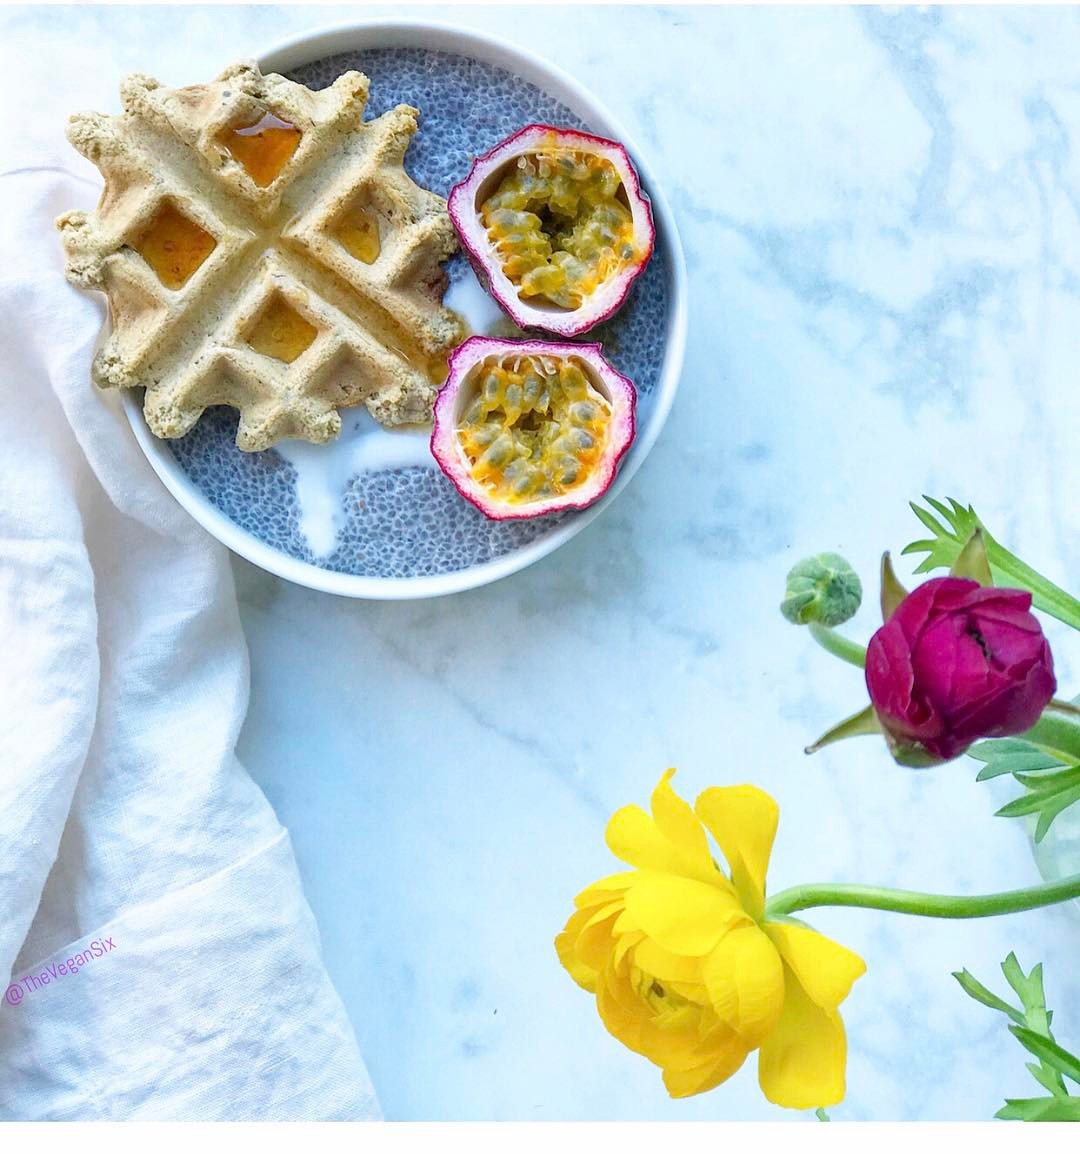 Chia Pudding with Passion Fruit and the Last Homemade Waffle